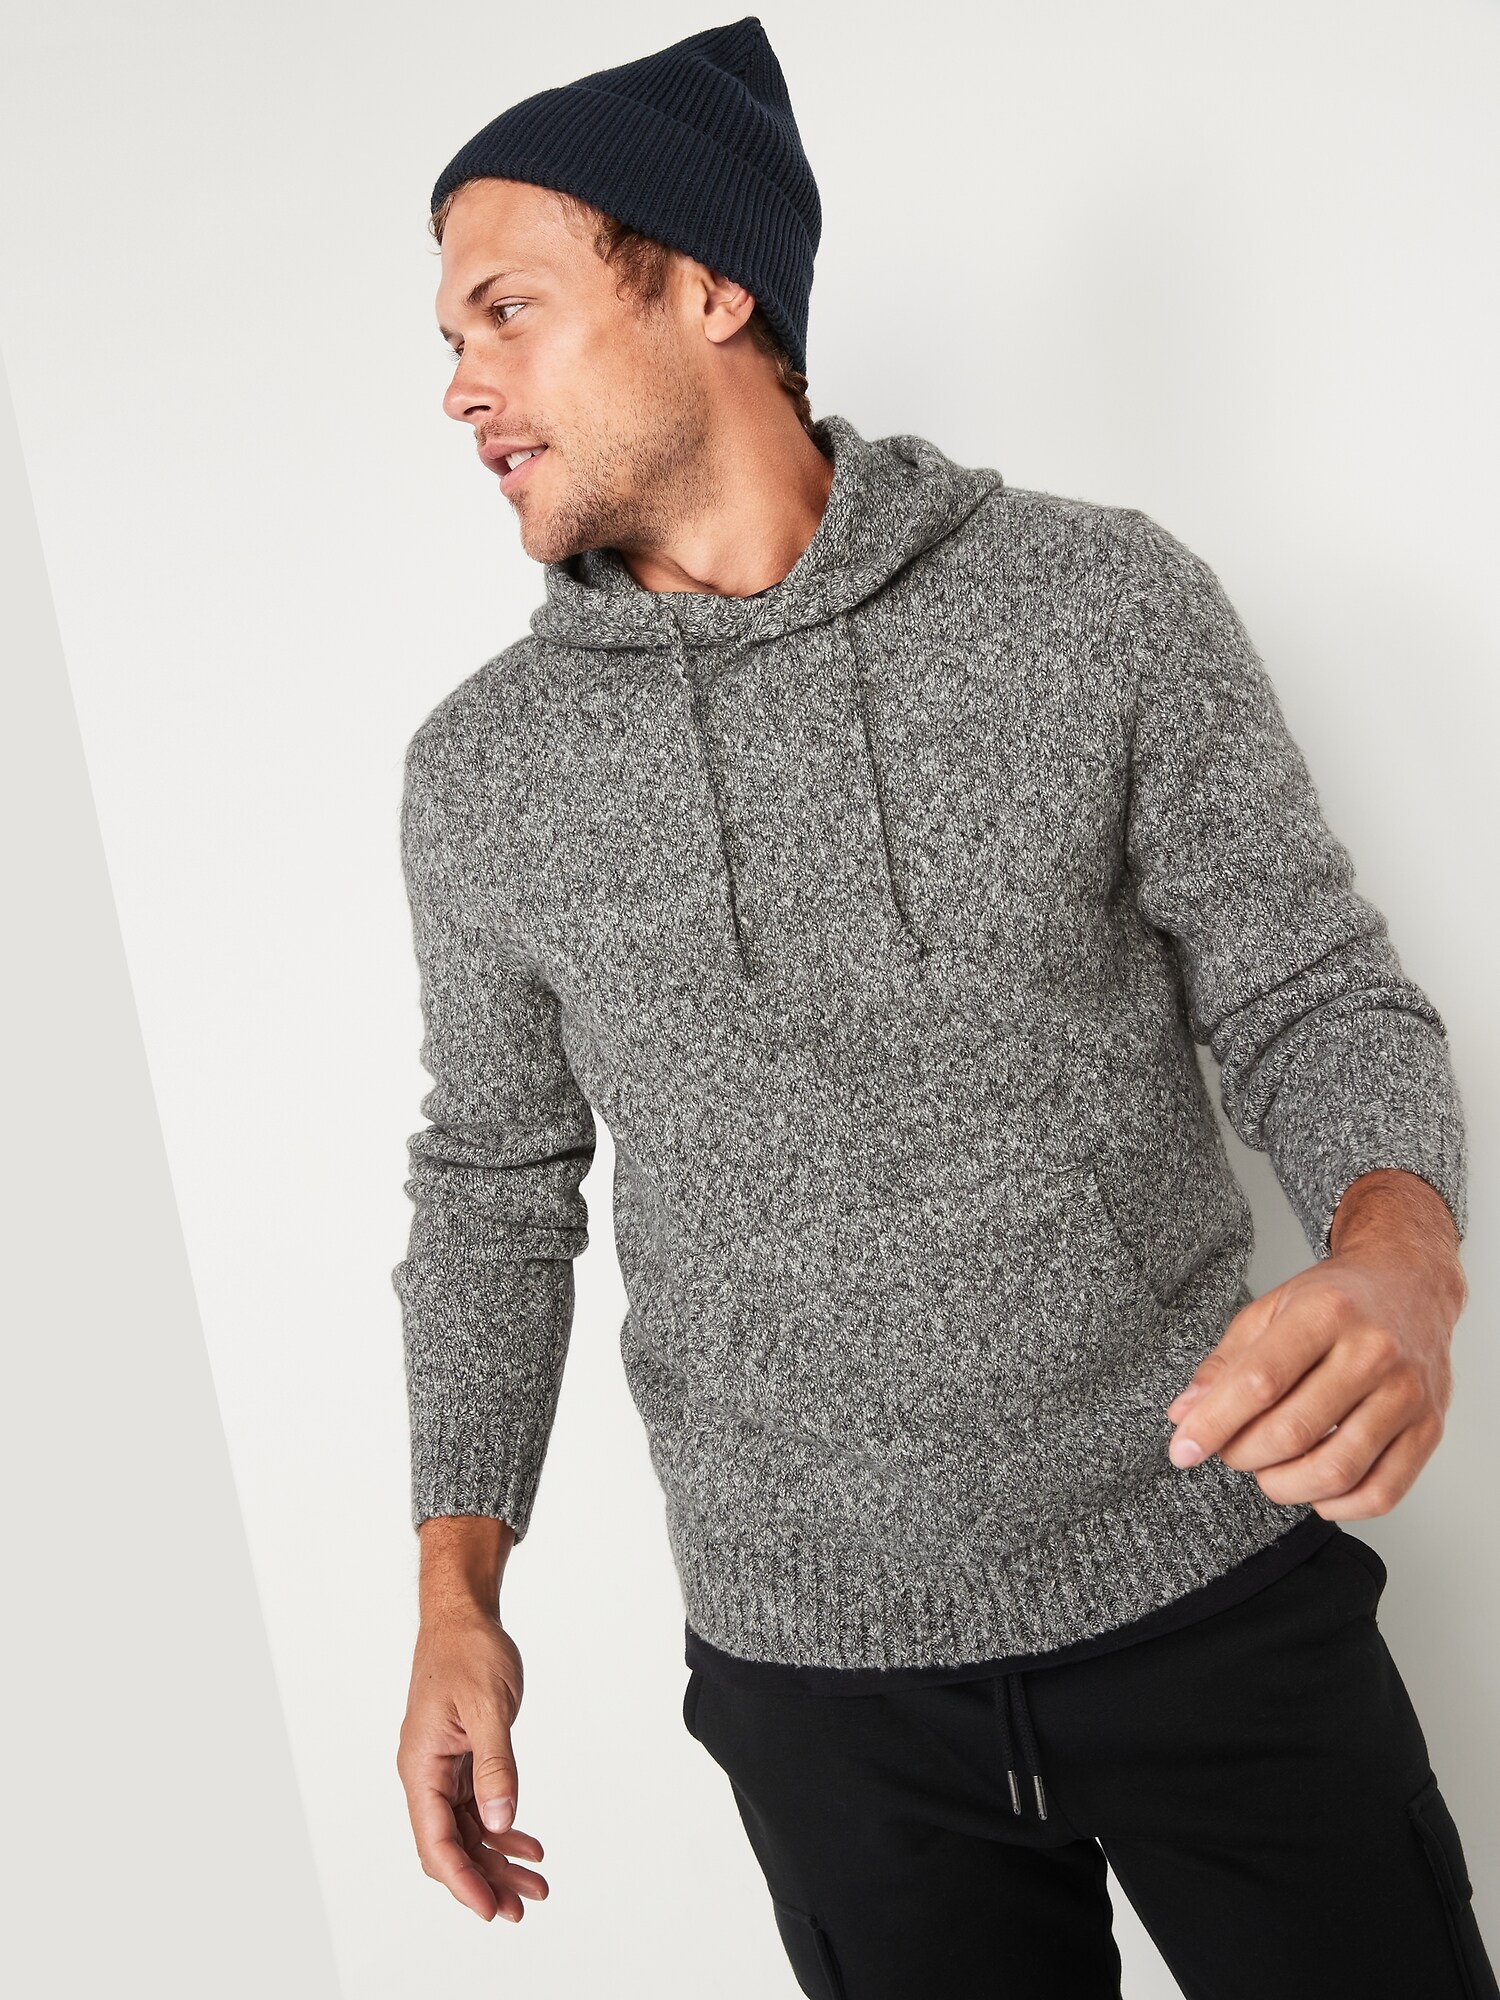 Pullover Sweater Men for Hoodie | Old Navy